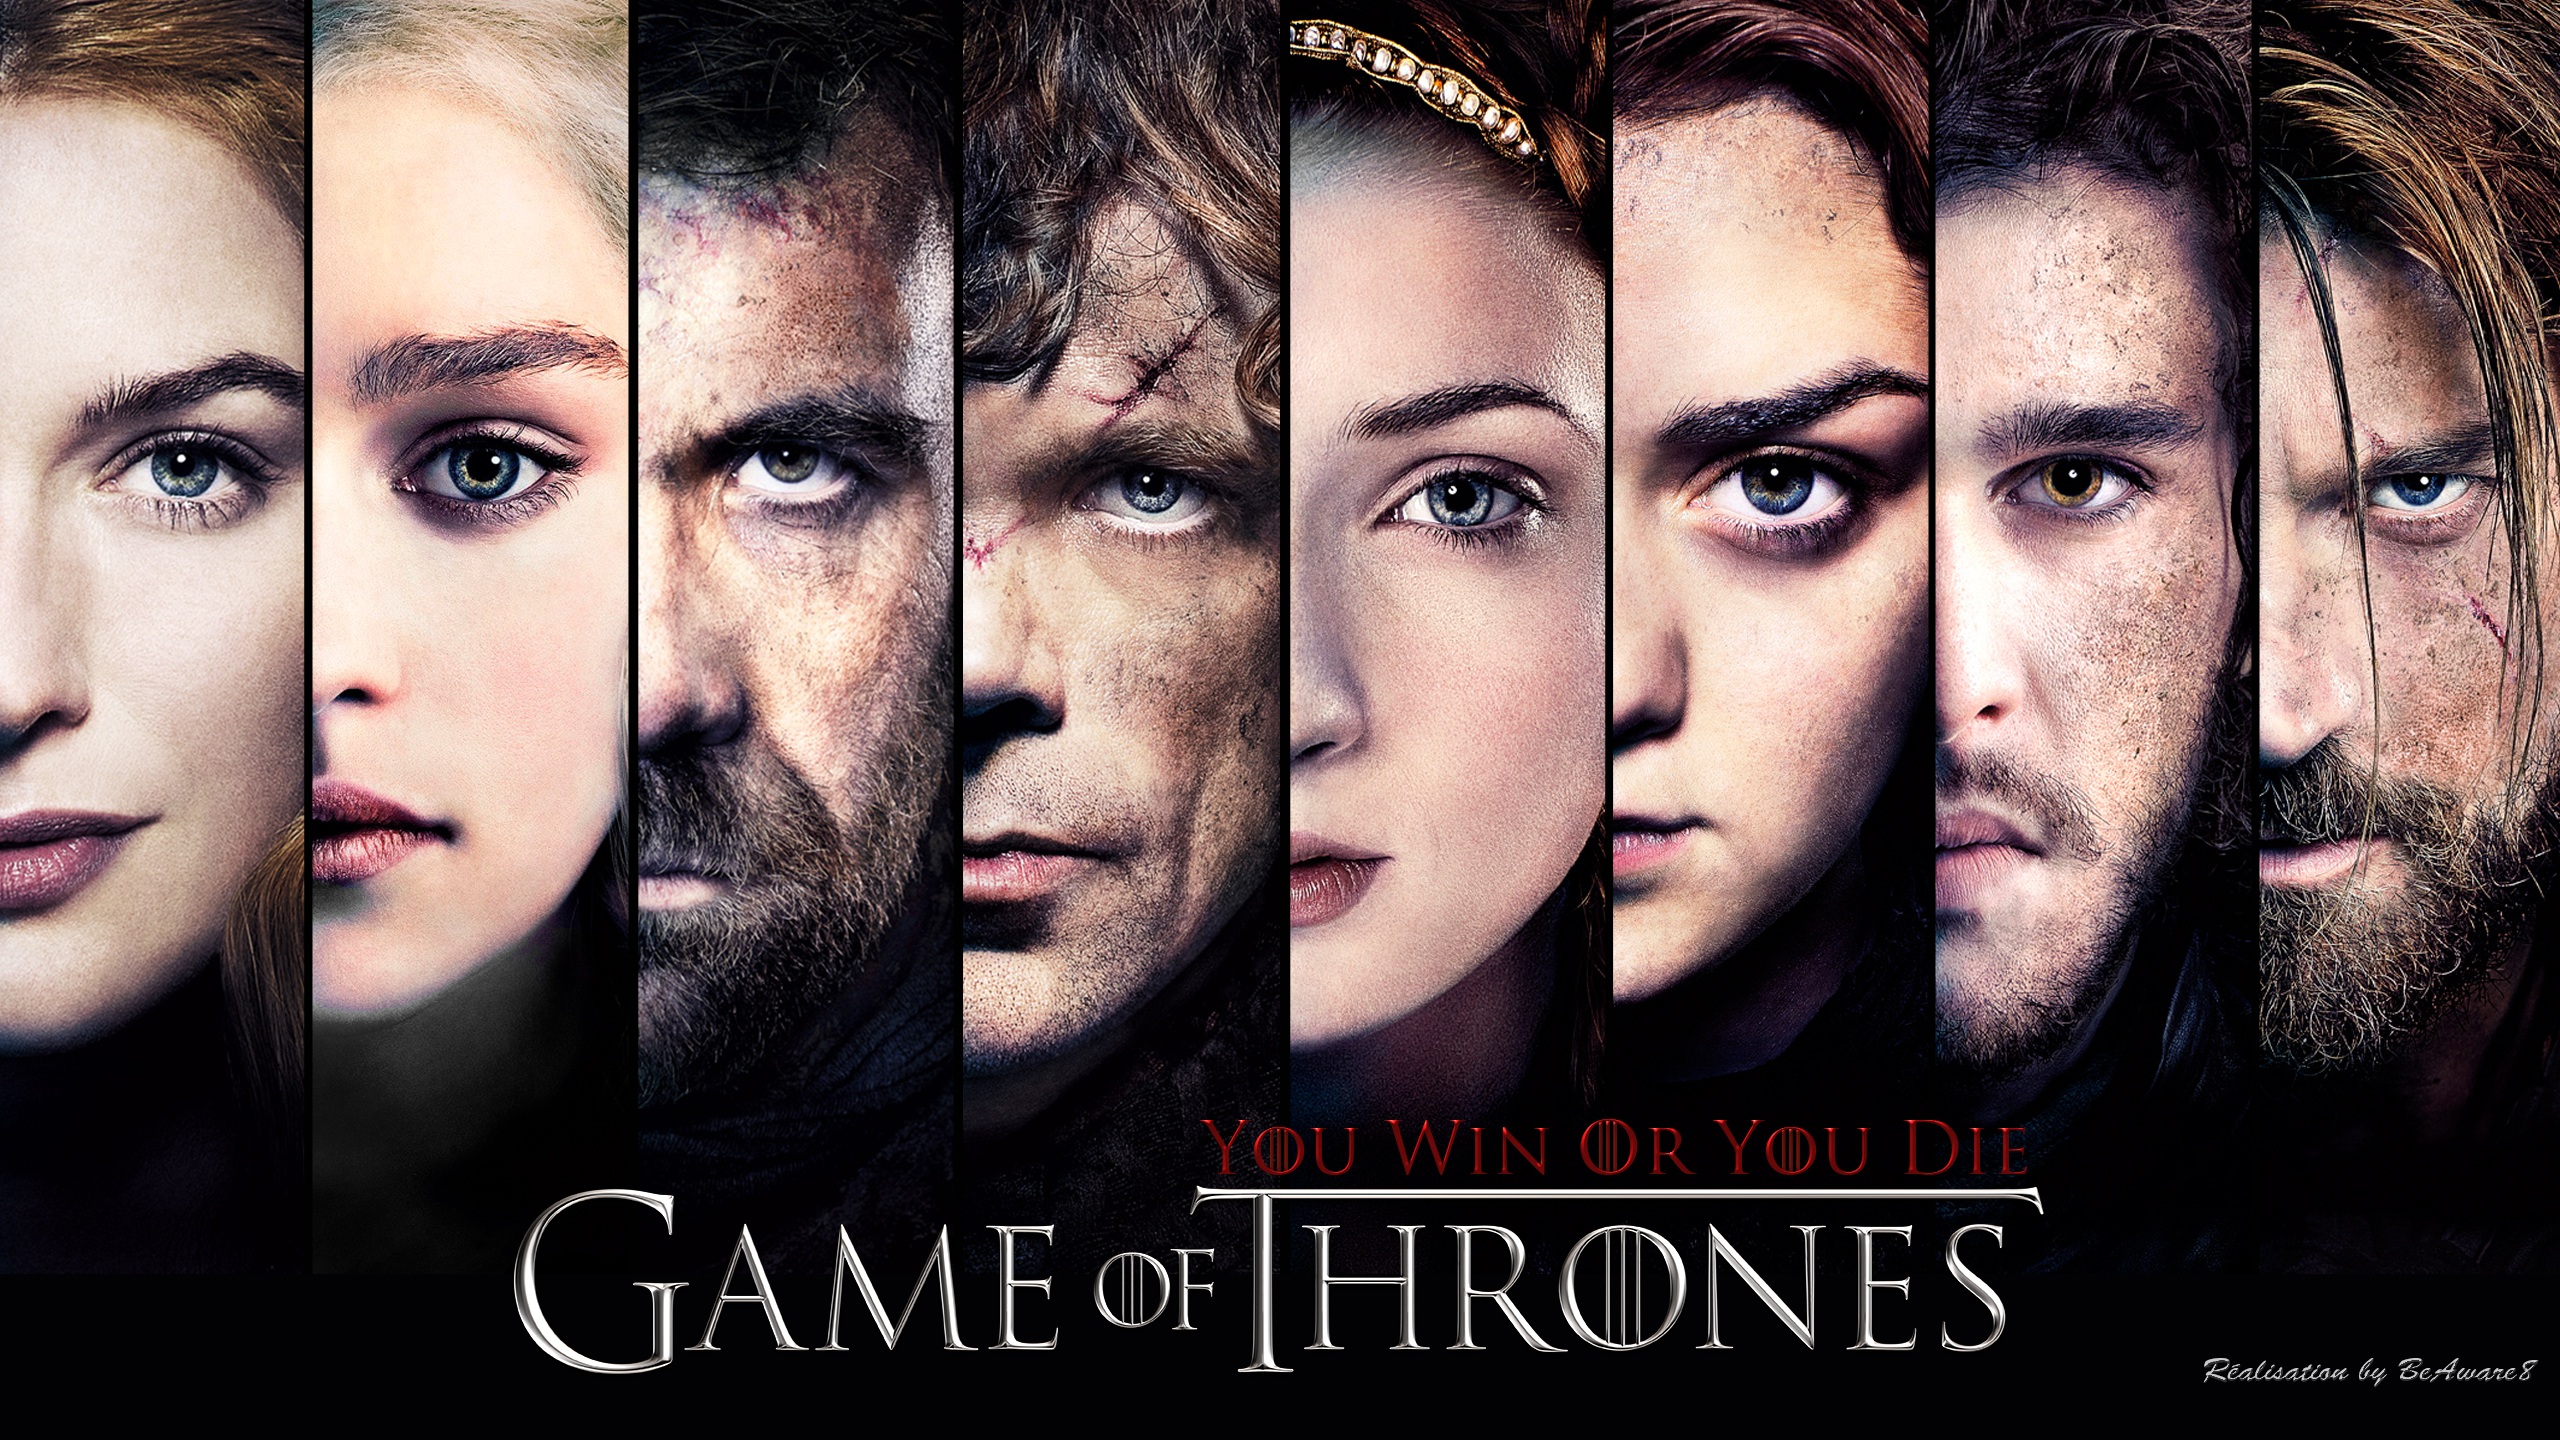 Game Of Thrones Hd Wallpapers Free Download For Desktop - Game Of Thrones Hd  Poster - 2560x1440 Wallpaper 